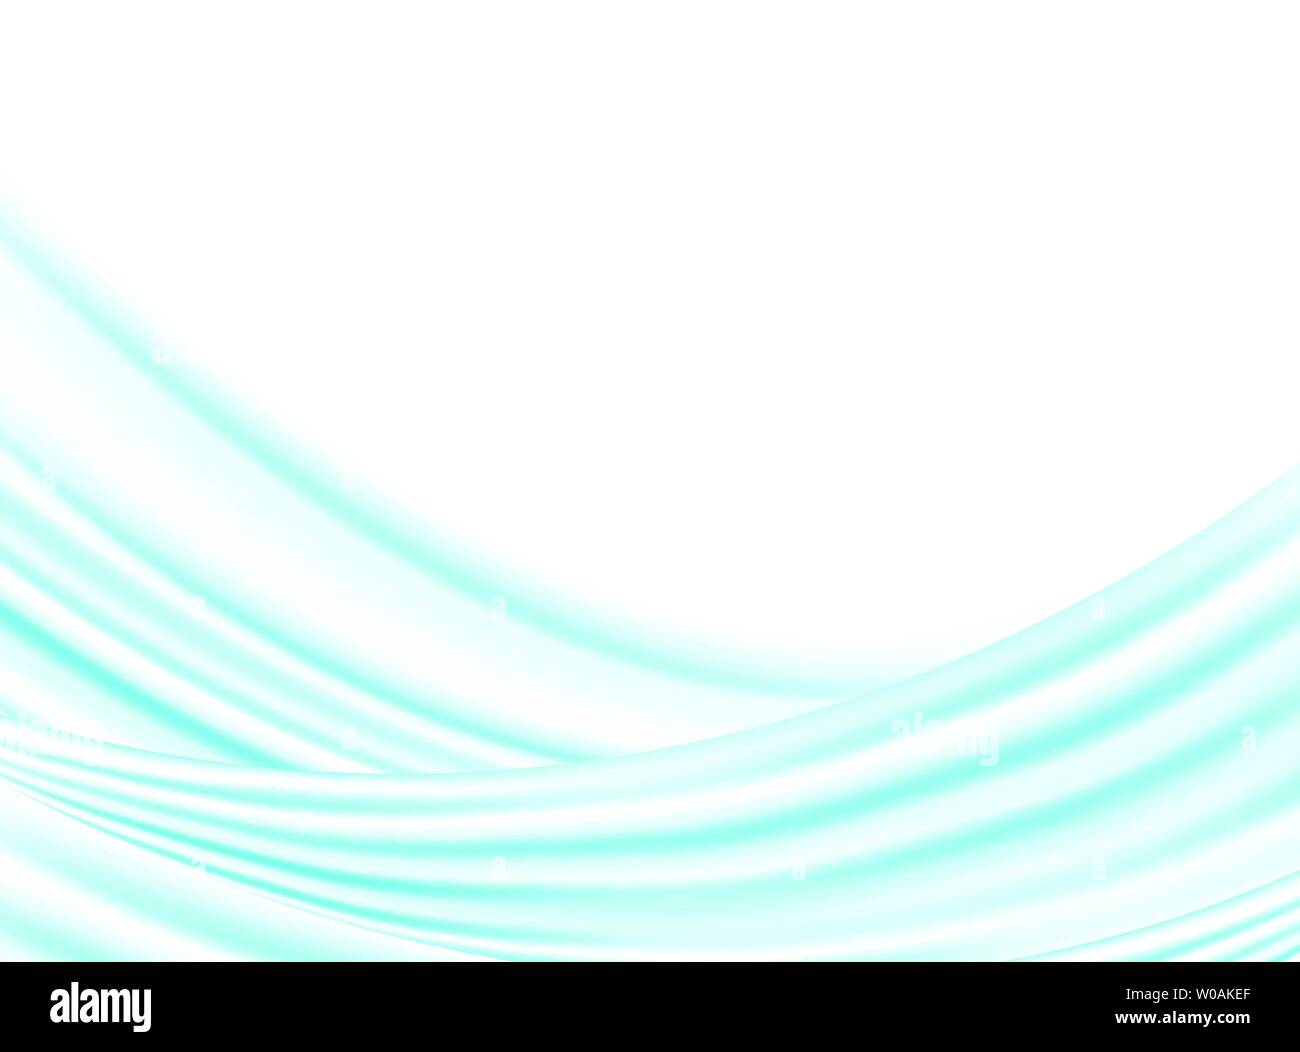 Abstract blue soft wavy background. Stock Vector